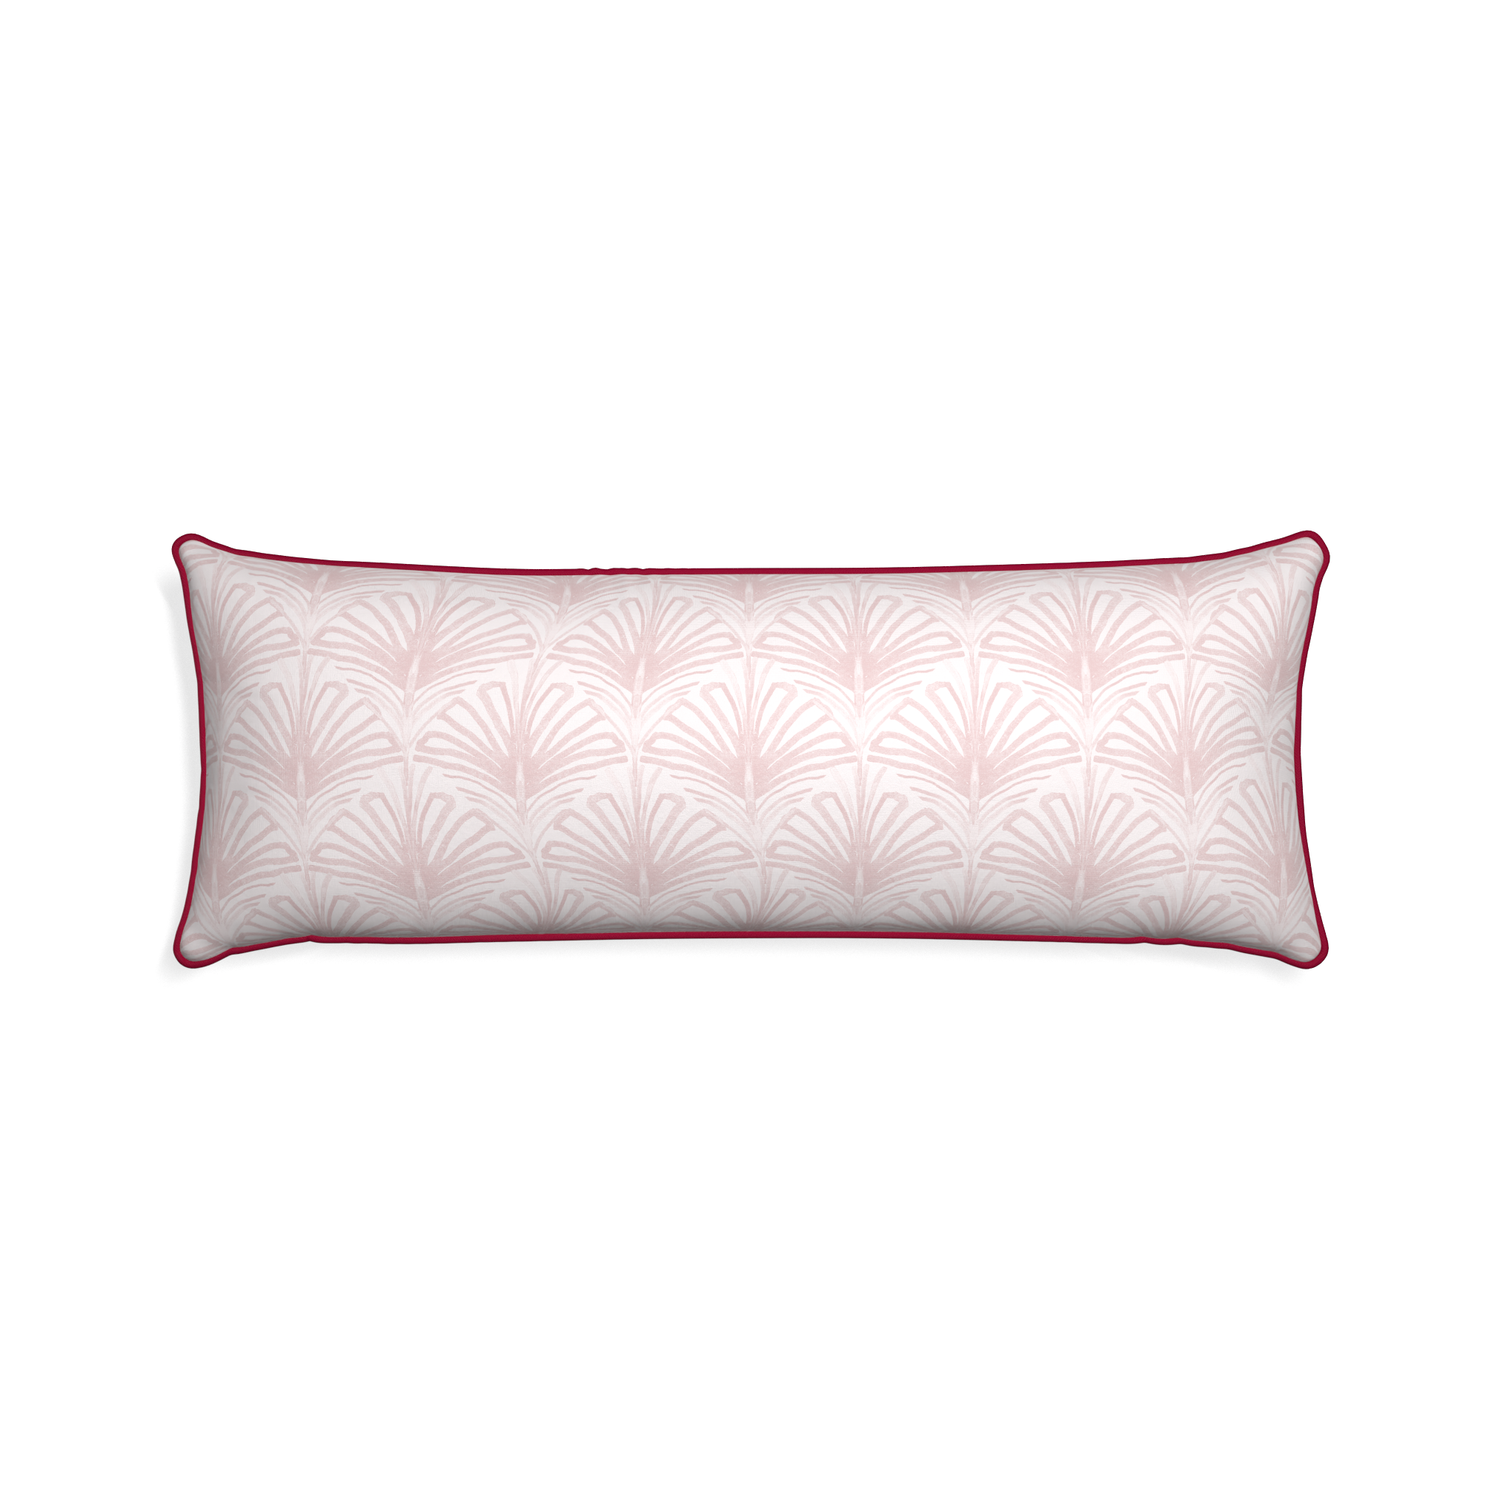 Xl-lumbar suzy rose custom pillow with raspberry piping on white background